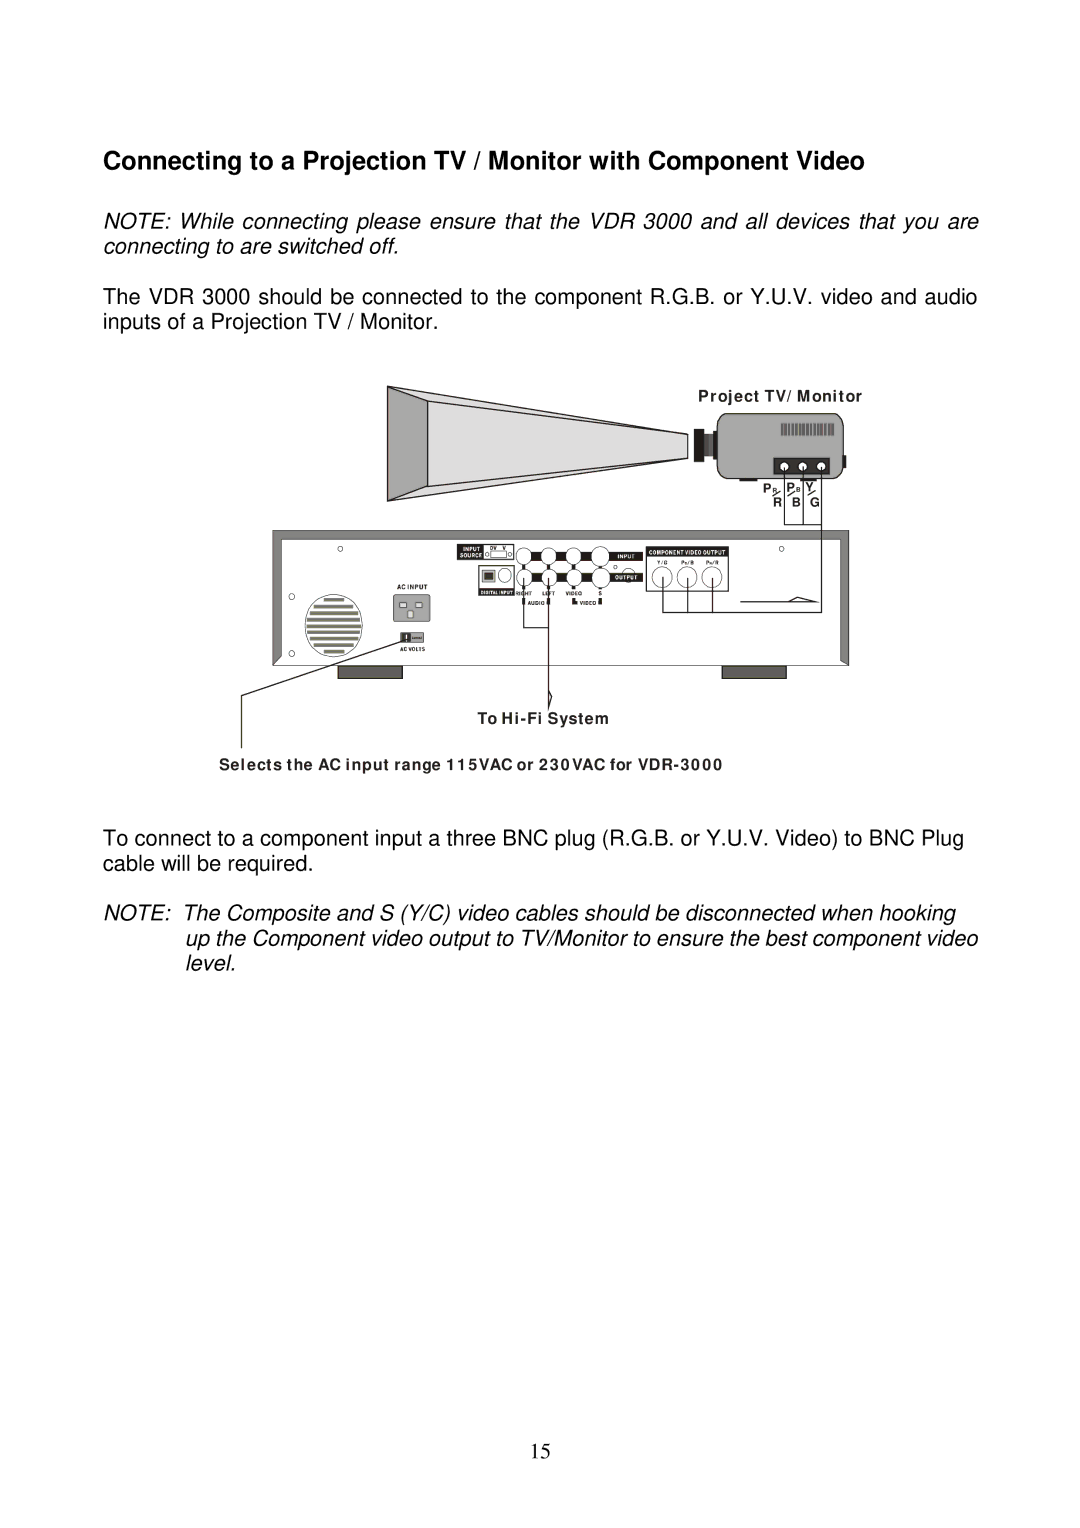 Datavideo VDR-3000 instruction manual Connecting to a Projection TV / Monitor with Component Video 